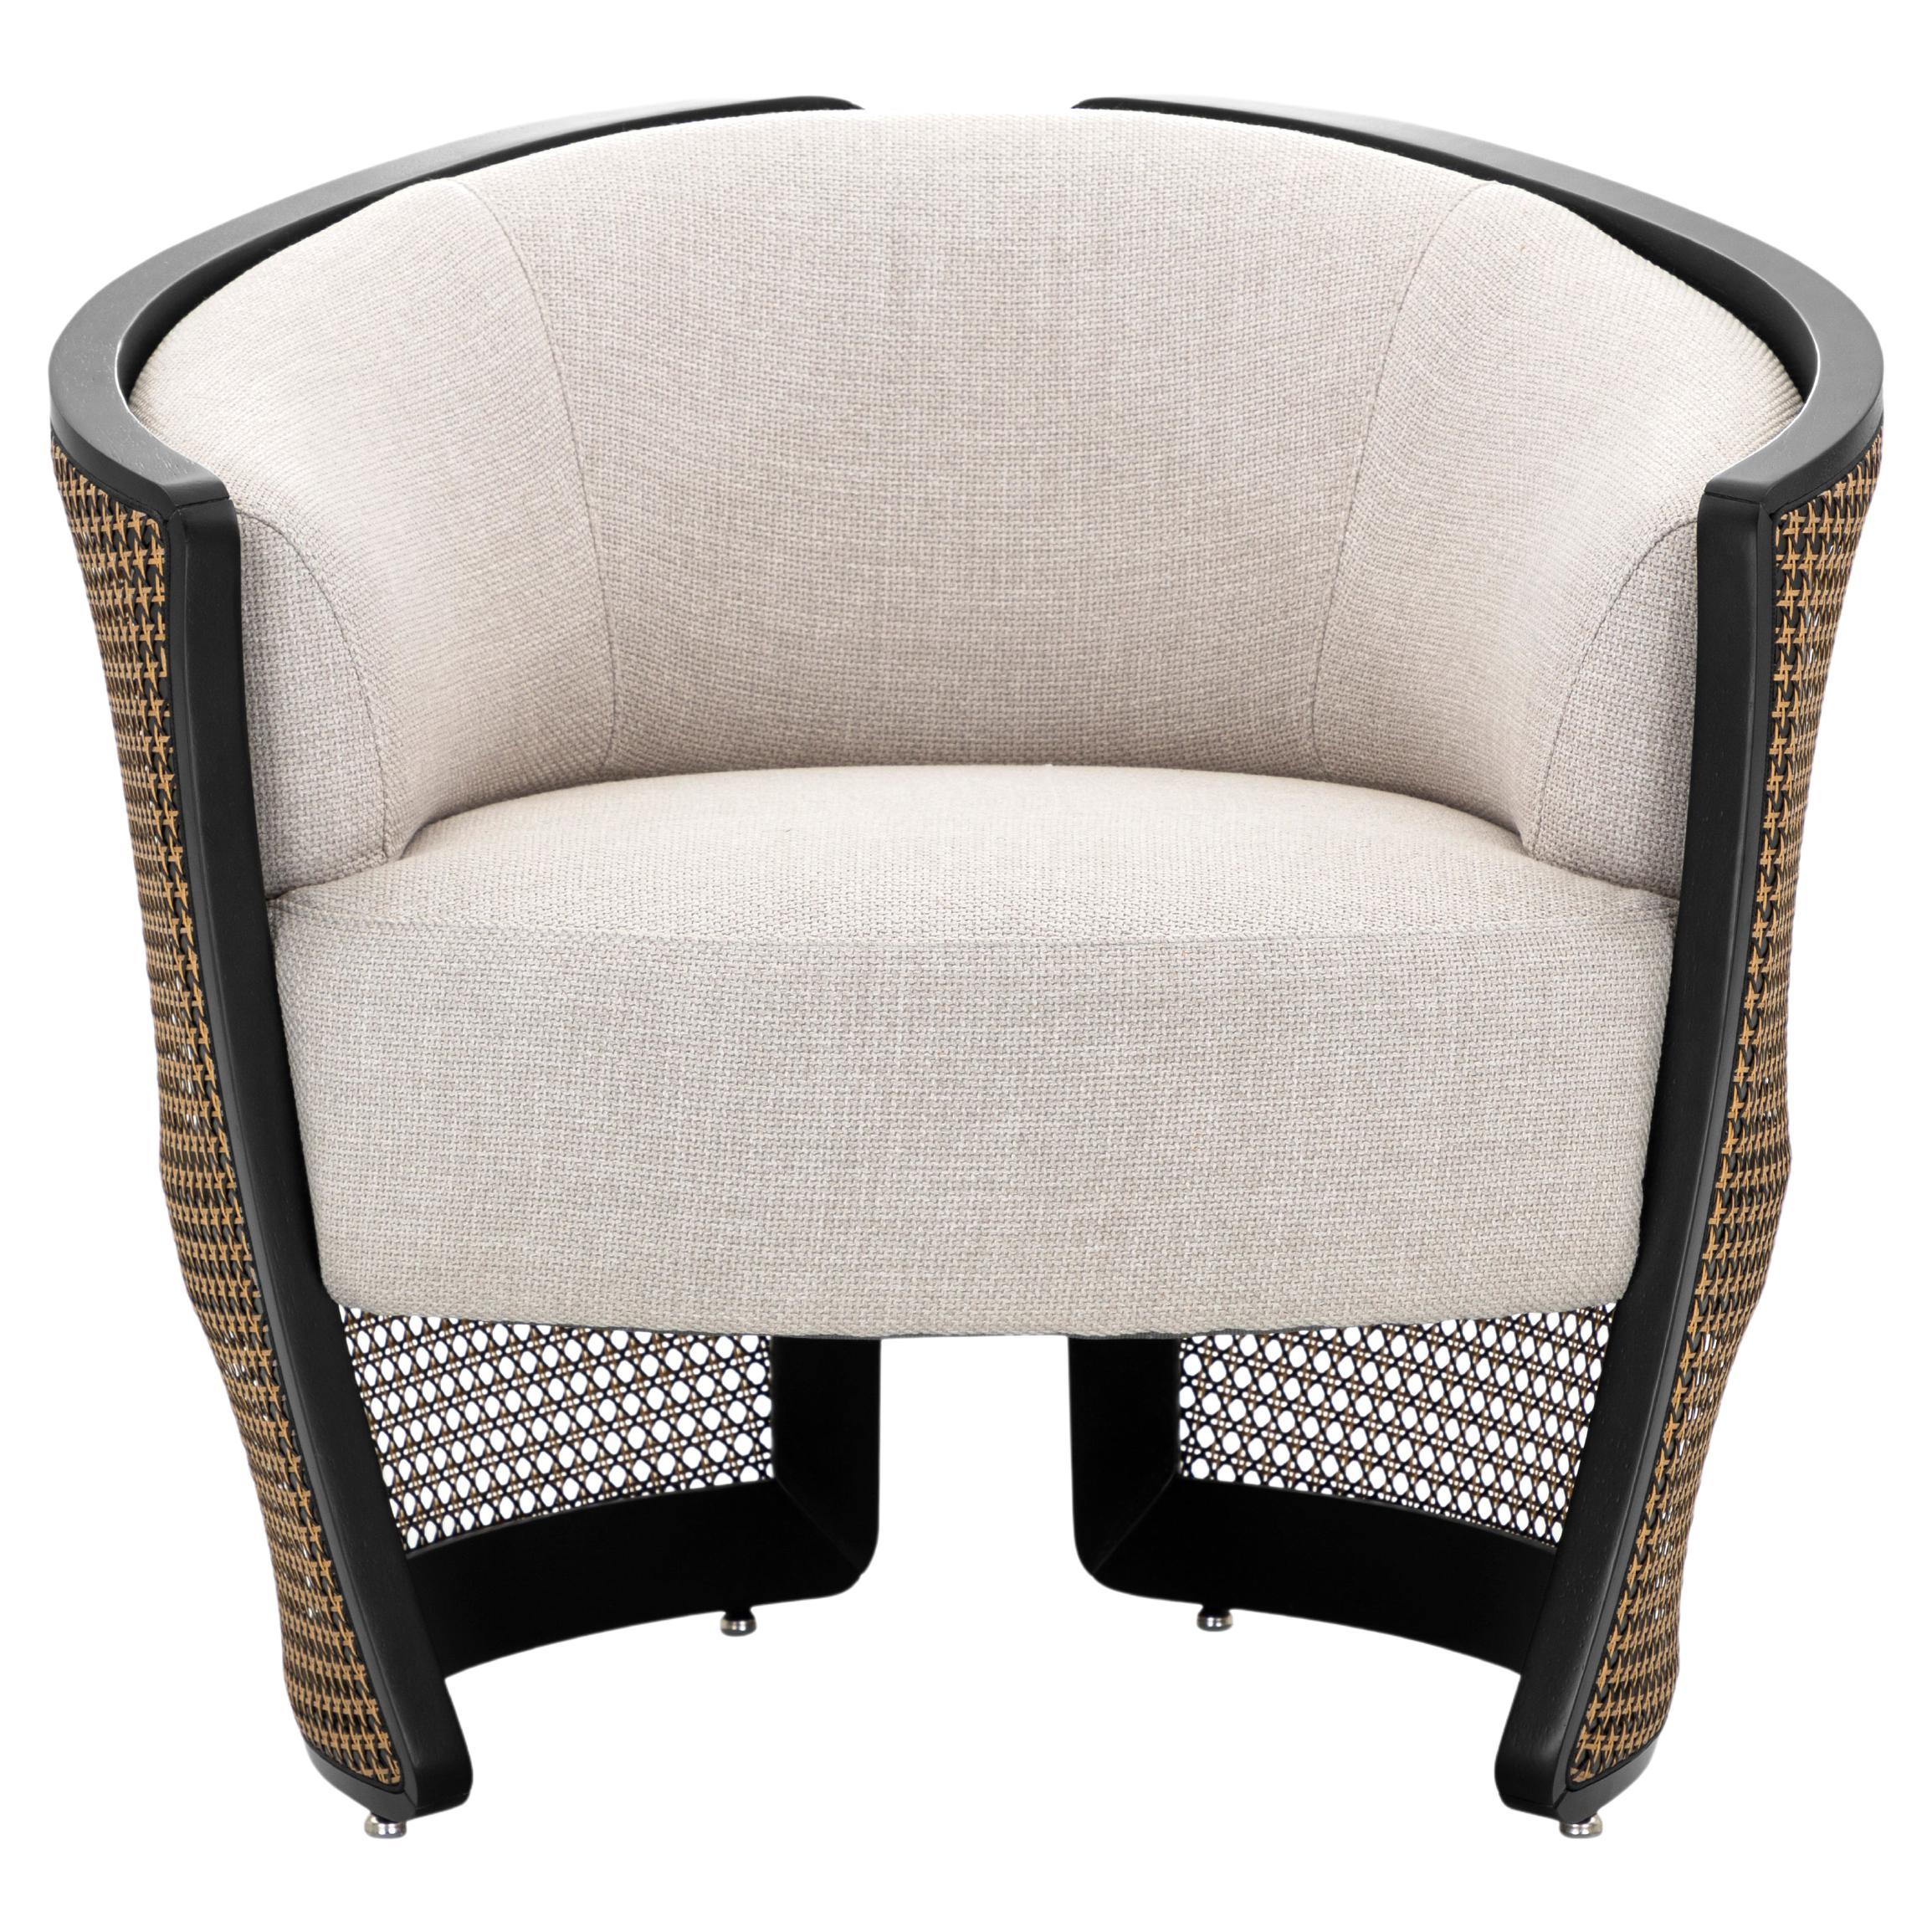 Lirio Accent Chair in Black Wood, Cane and Light Grey Fabric